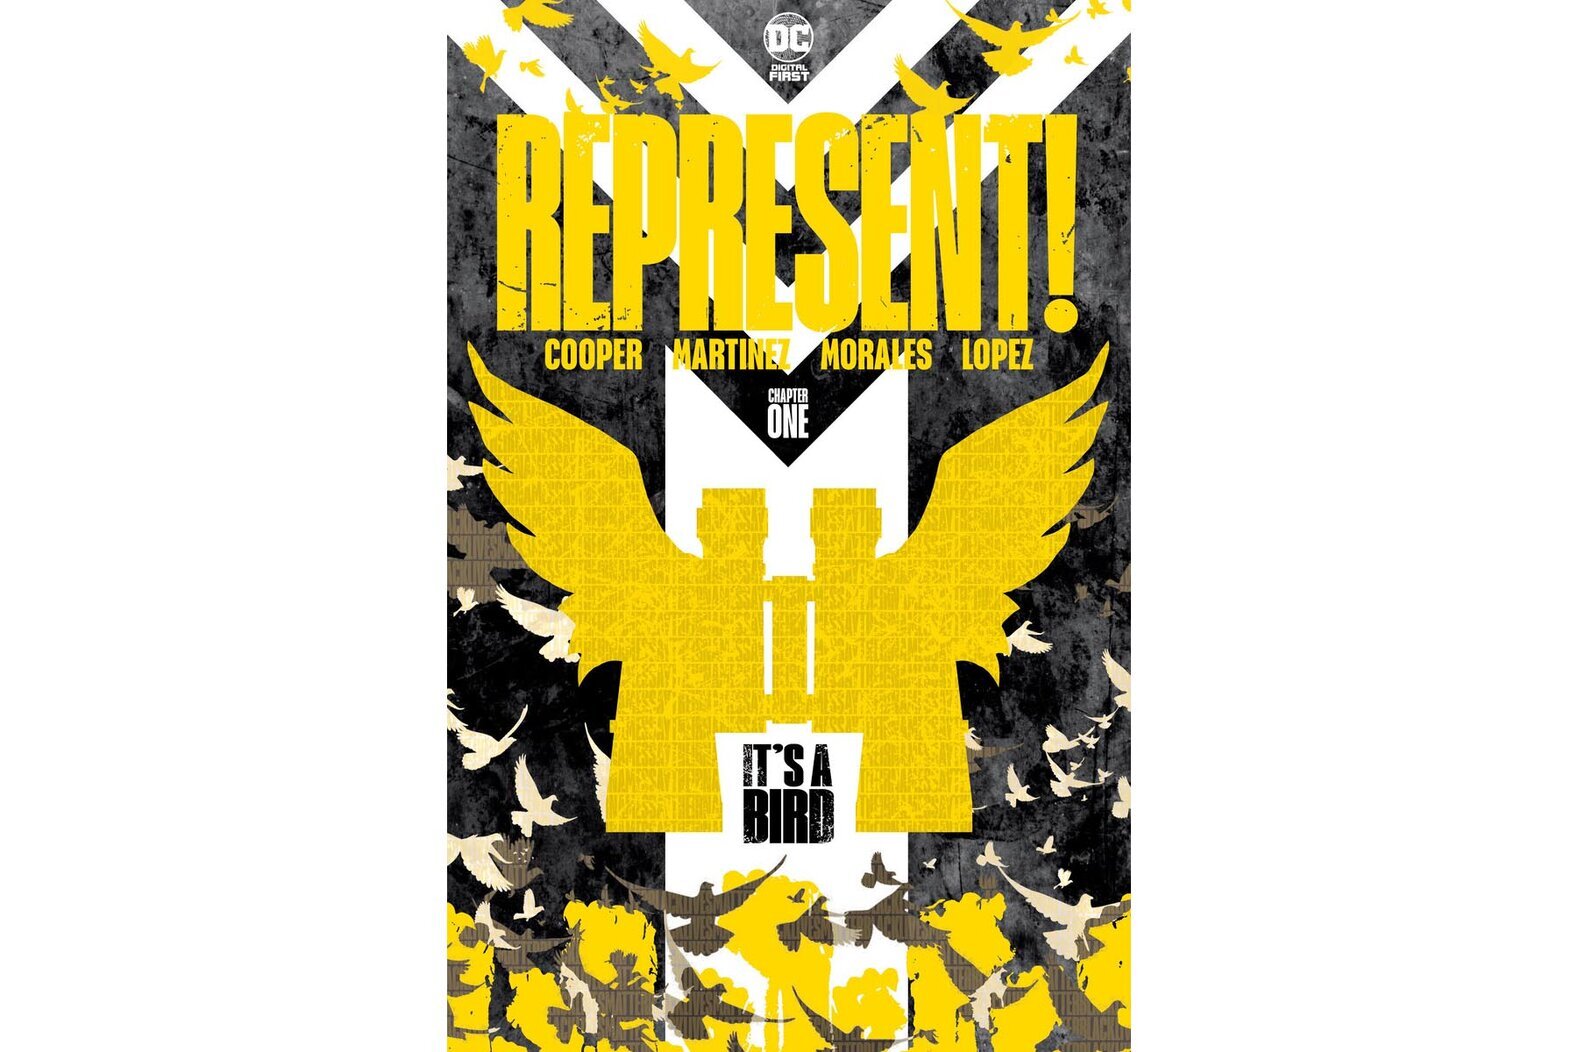 “It’s a Bird” is the first chapter of the new Represent! digital series from DC Comics.